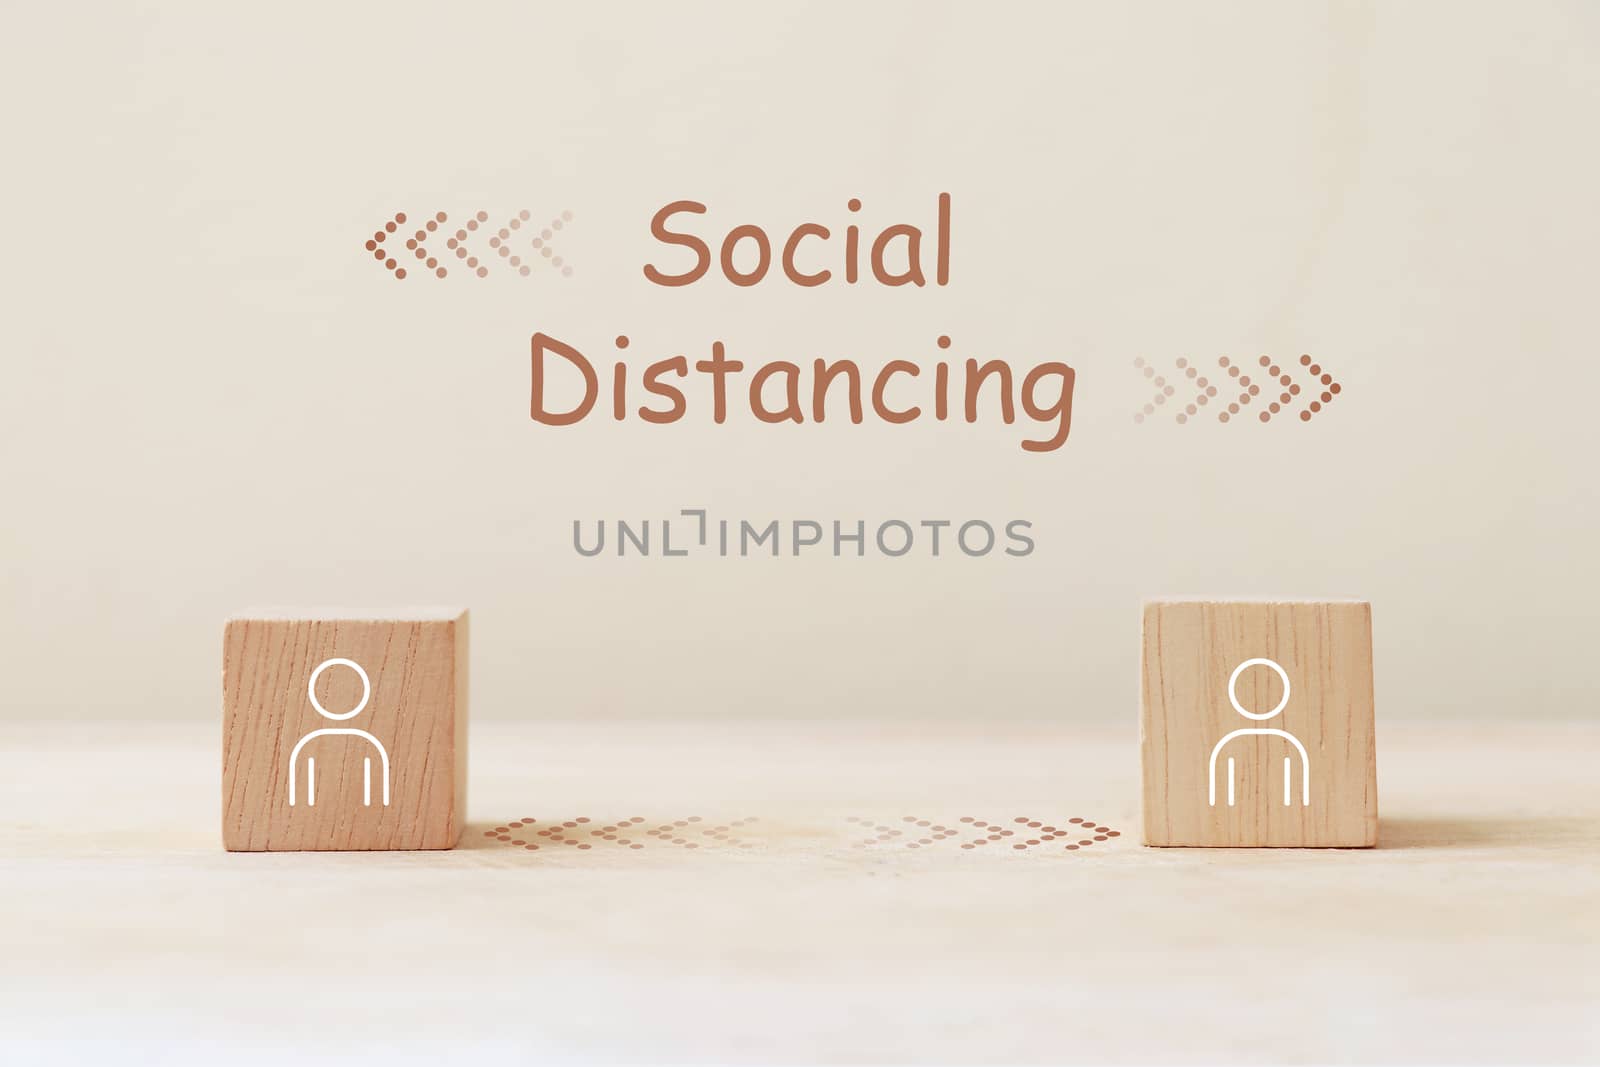 Social distancing for reducing the risk of infection. Person icon on wooden cube with social distancing concept. by Eungsuwat